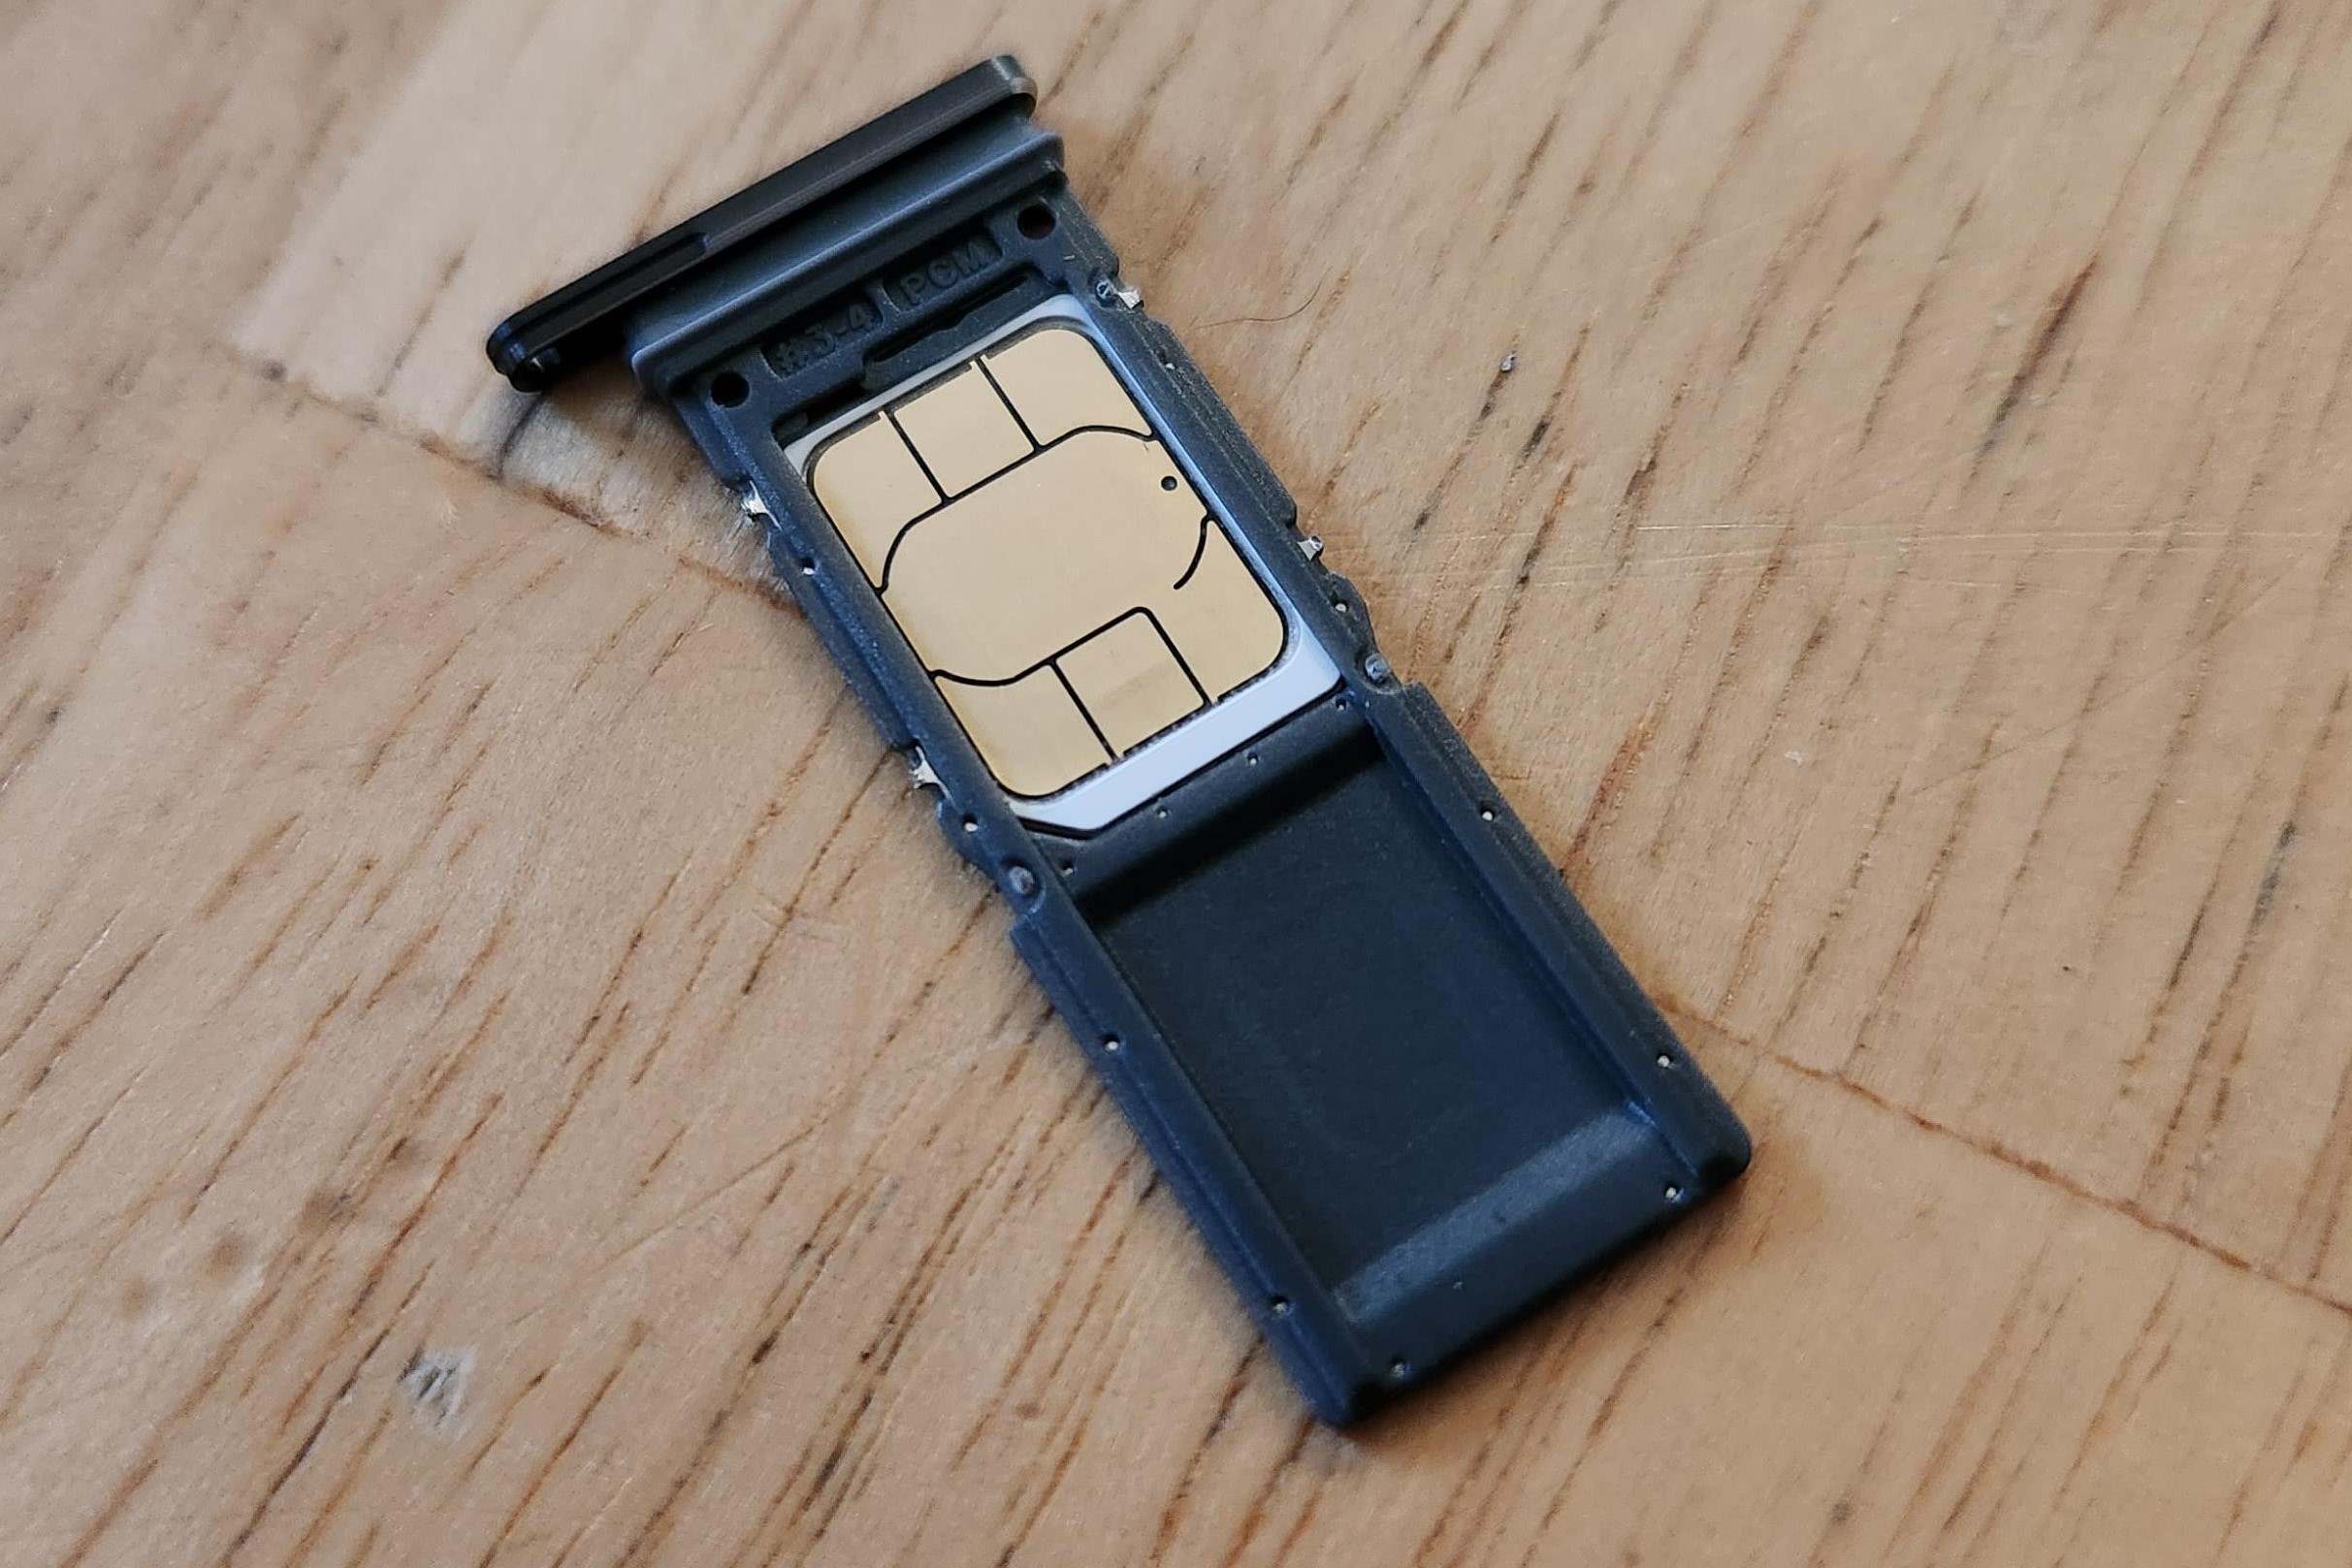 opening-the-sim-card-slot-on-a-phone-essential-steps